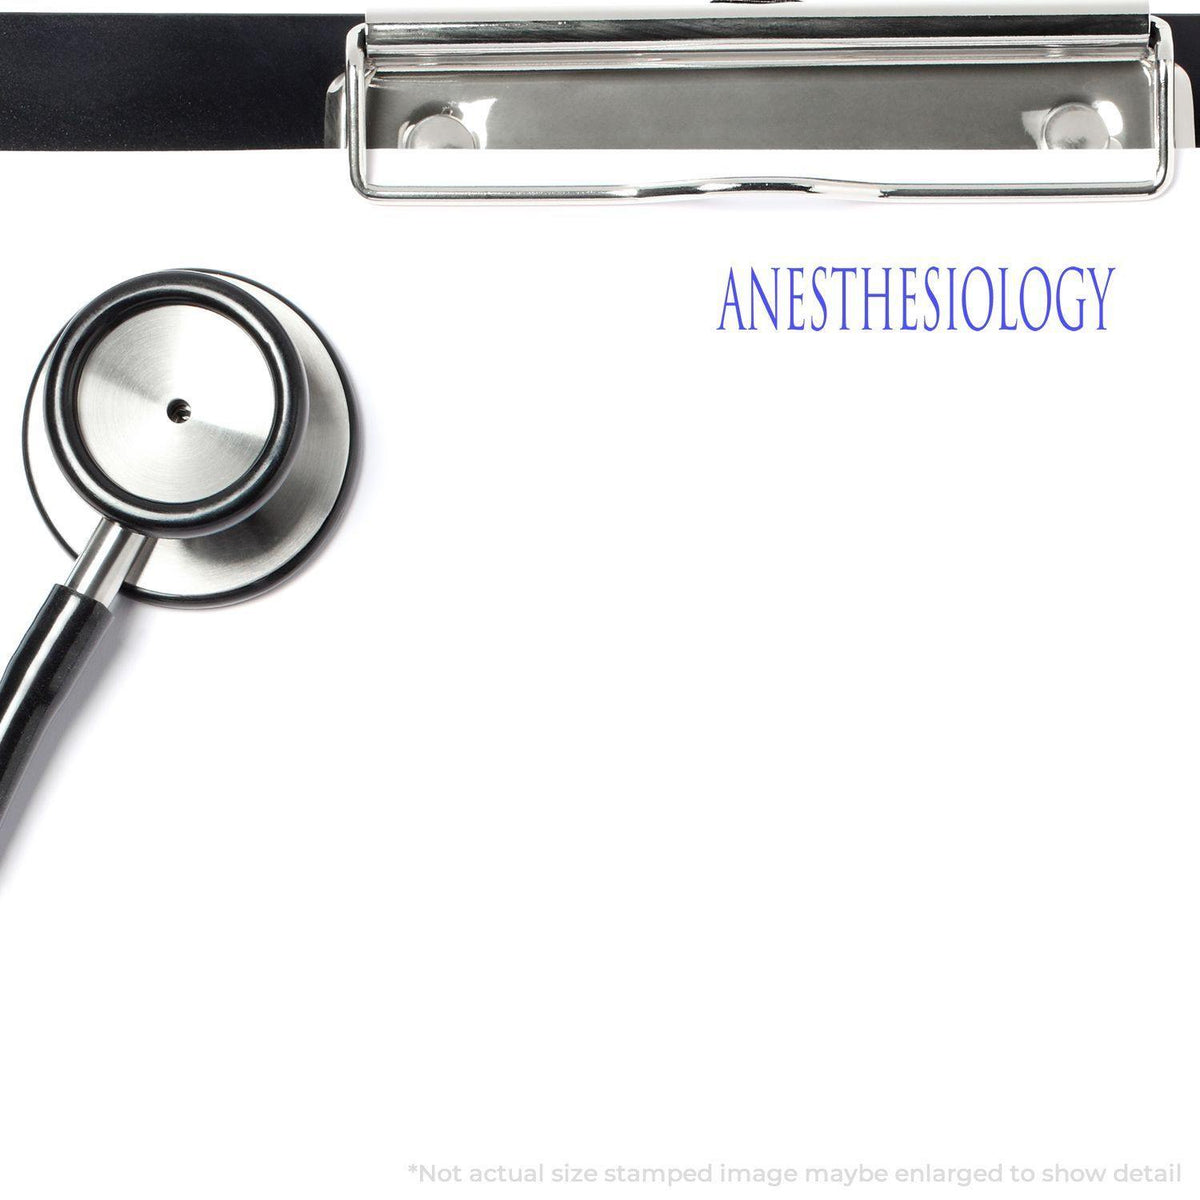 Slim Pre Inked Anesthesiology Stamp - Engineer Seal Stamps - Brand_Slim, Impression Size_Small, Stamp Type_Pre-Inked Stamp, Type of Use_Medical Office